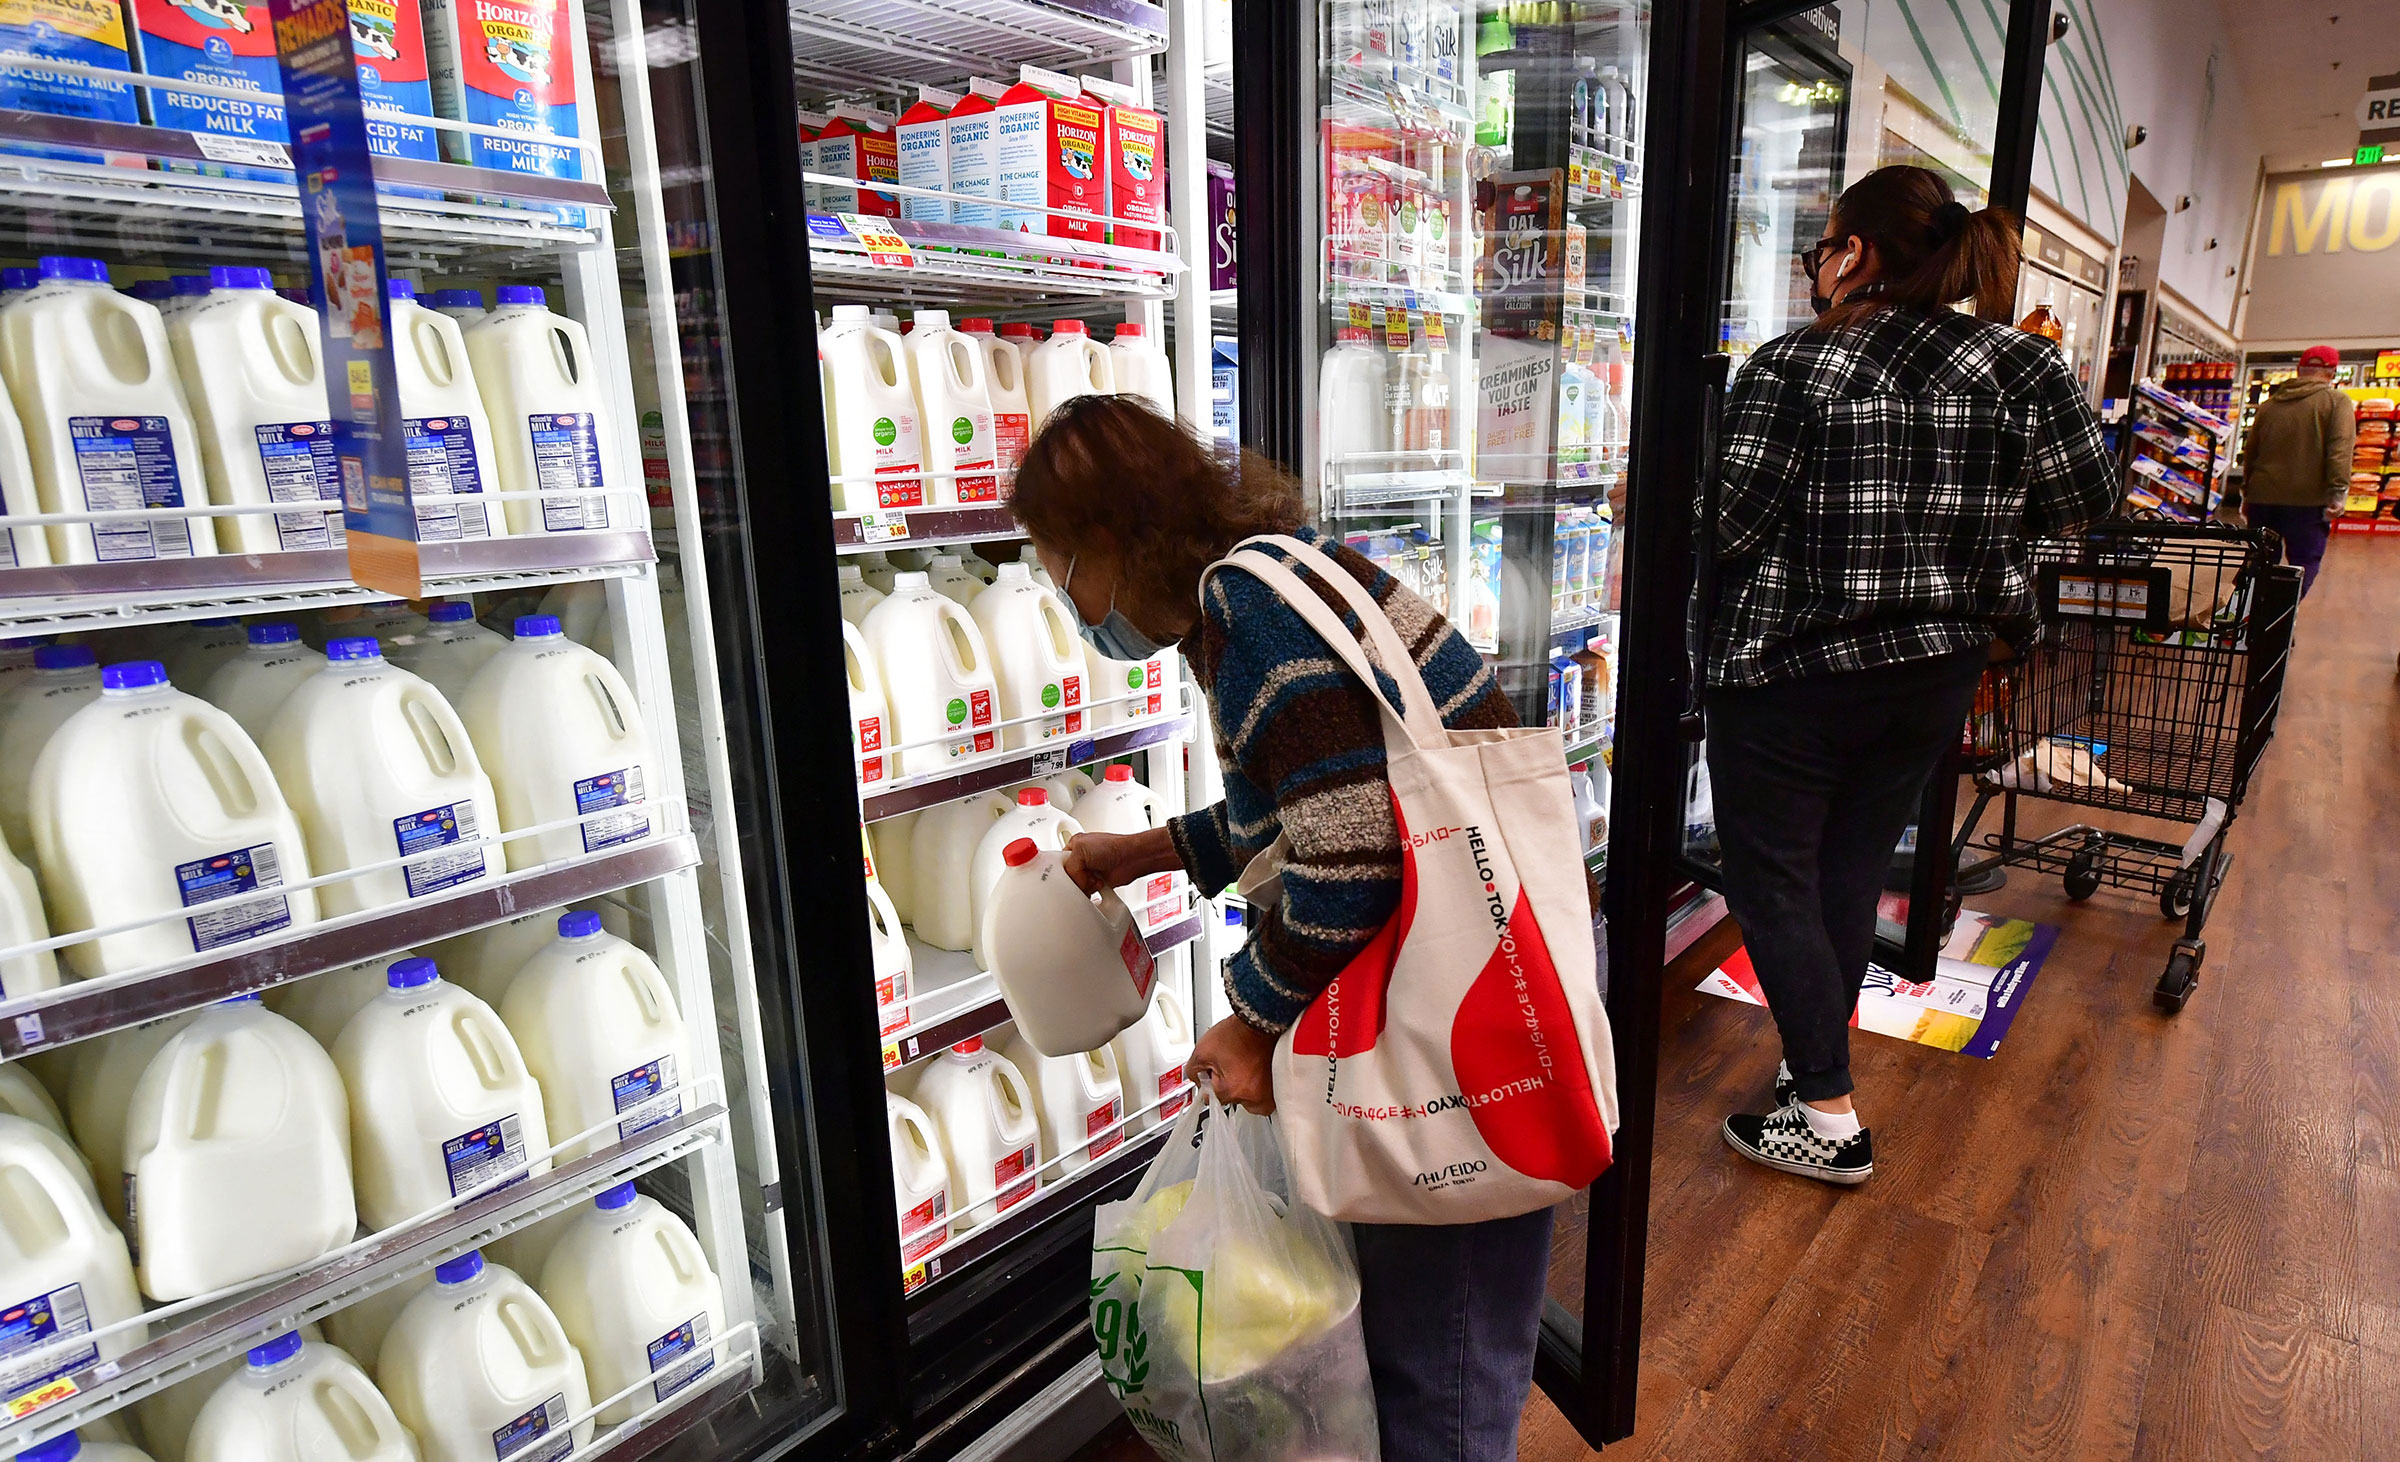 A person pulls out a gallon of milk as people shop at a grocery store in Monterey Park, Calif, on April 12, 2022. (Frederic J. Brown—AFP/Getty Images)